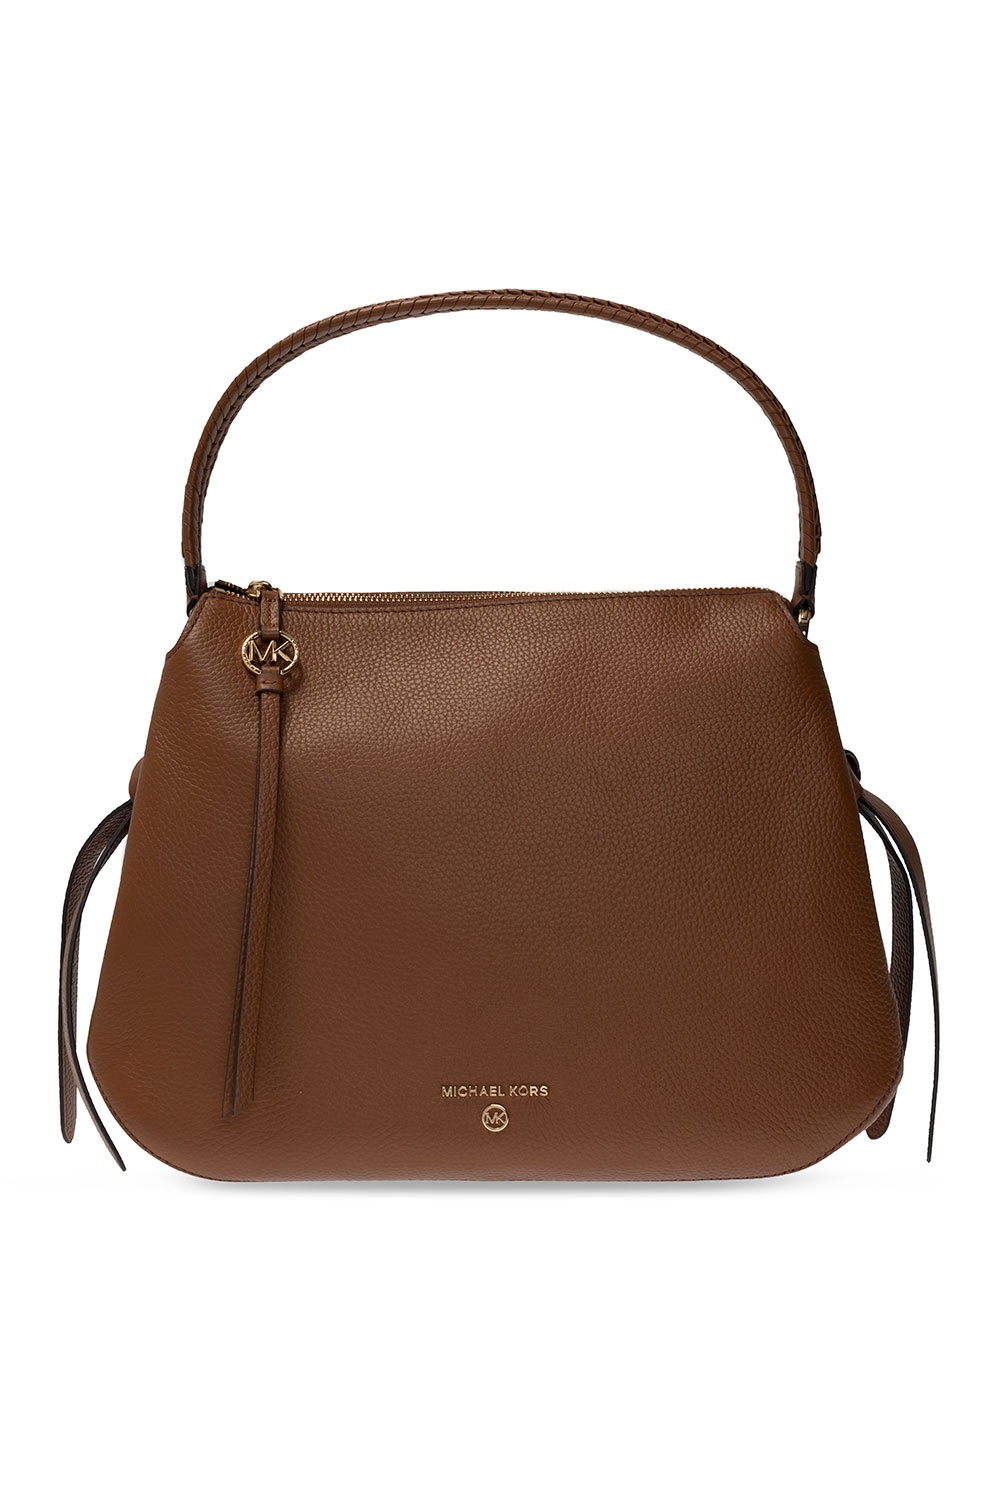 michael kors different style bags